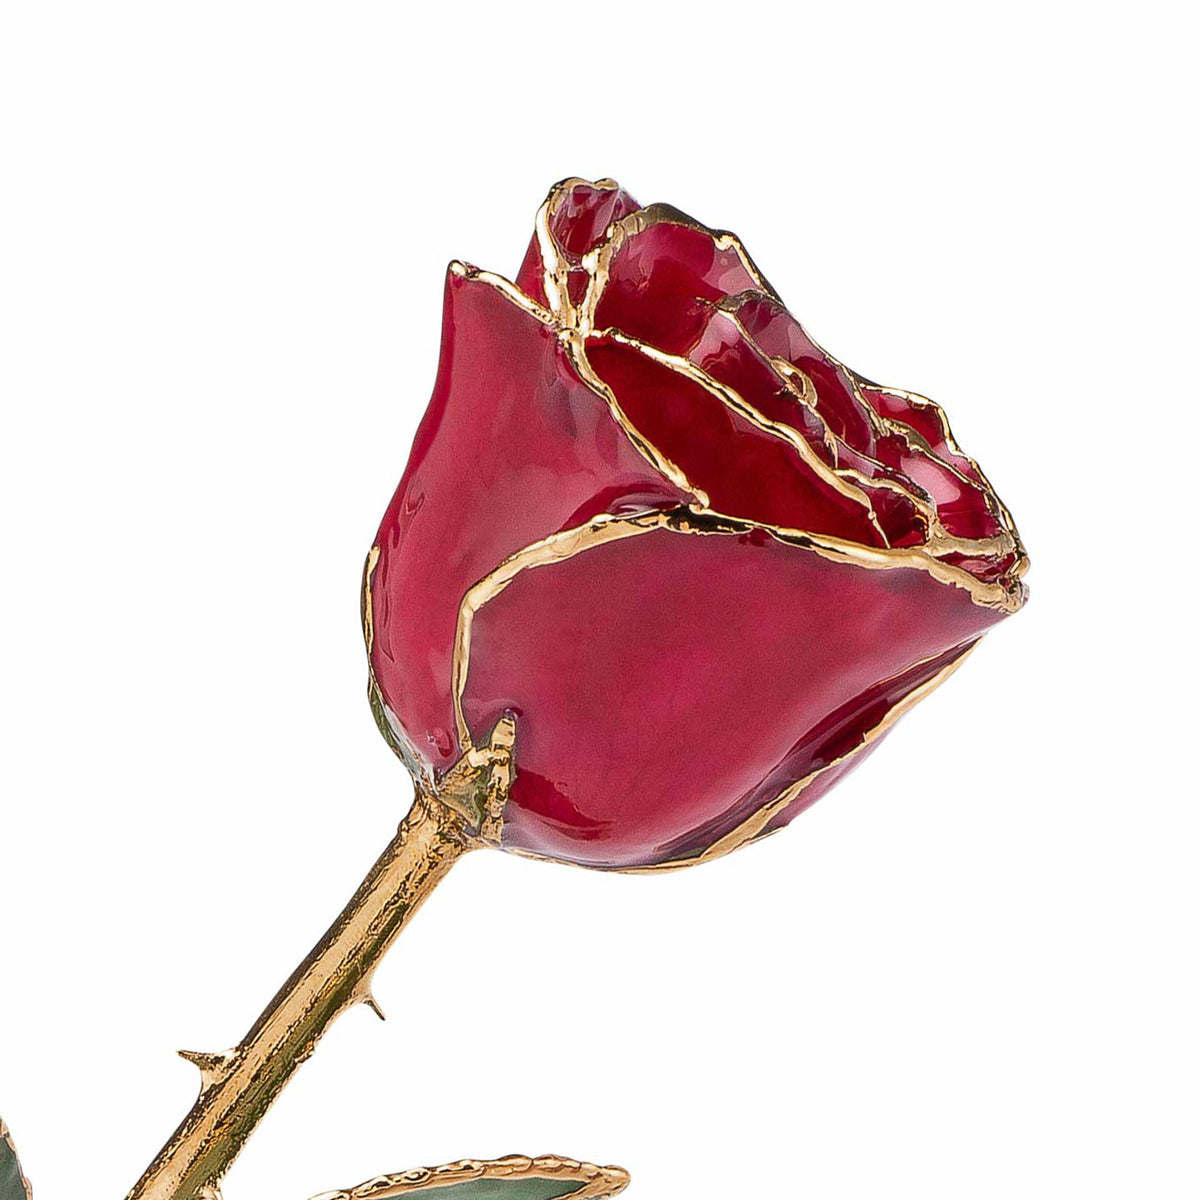 24K Gold Trimmed Forever Rose with Deep Red Burgundy Petals with View of Stem, Leaves, and Rose Petals and Showing Detail of Gold Trim